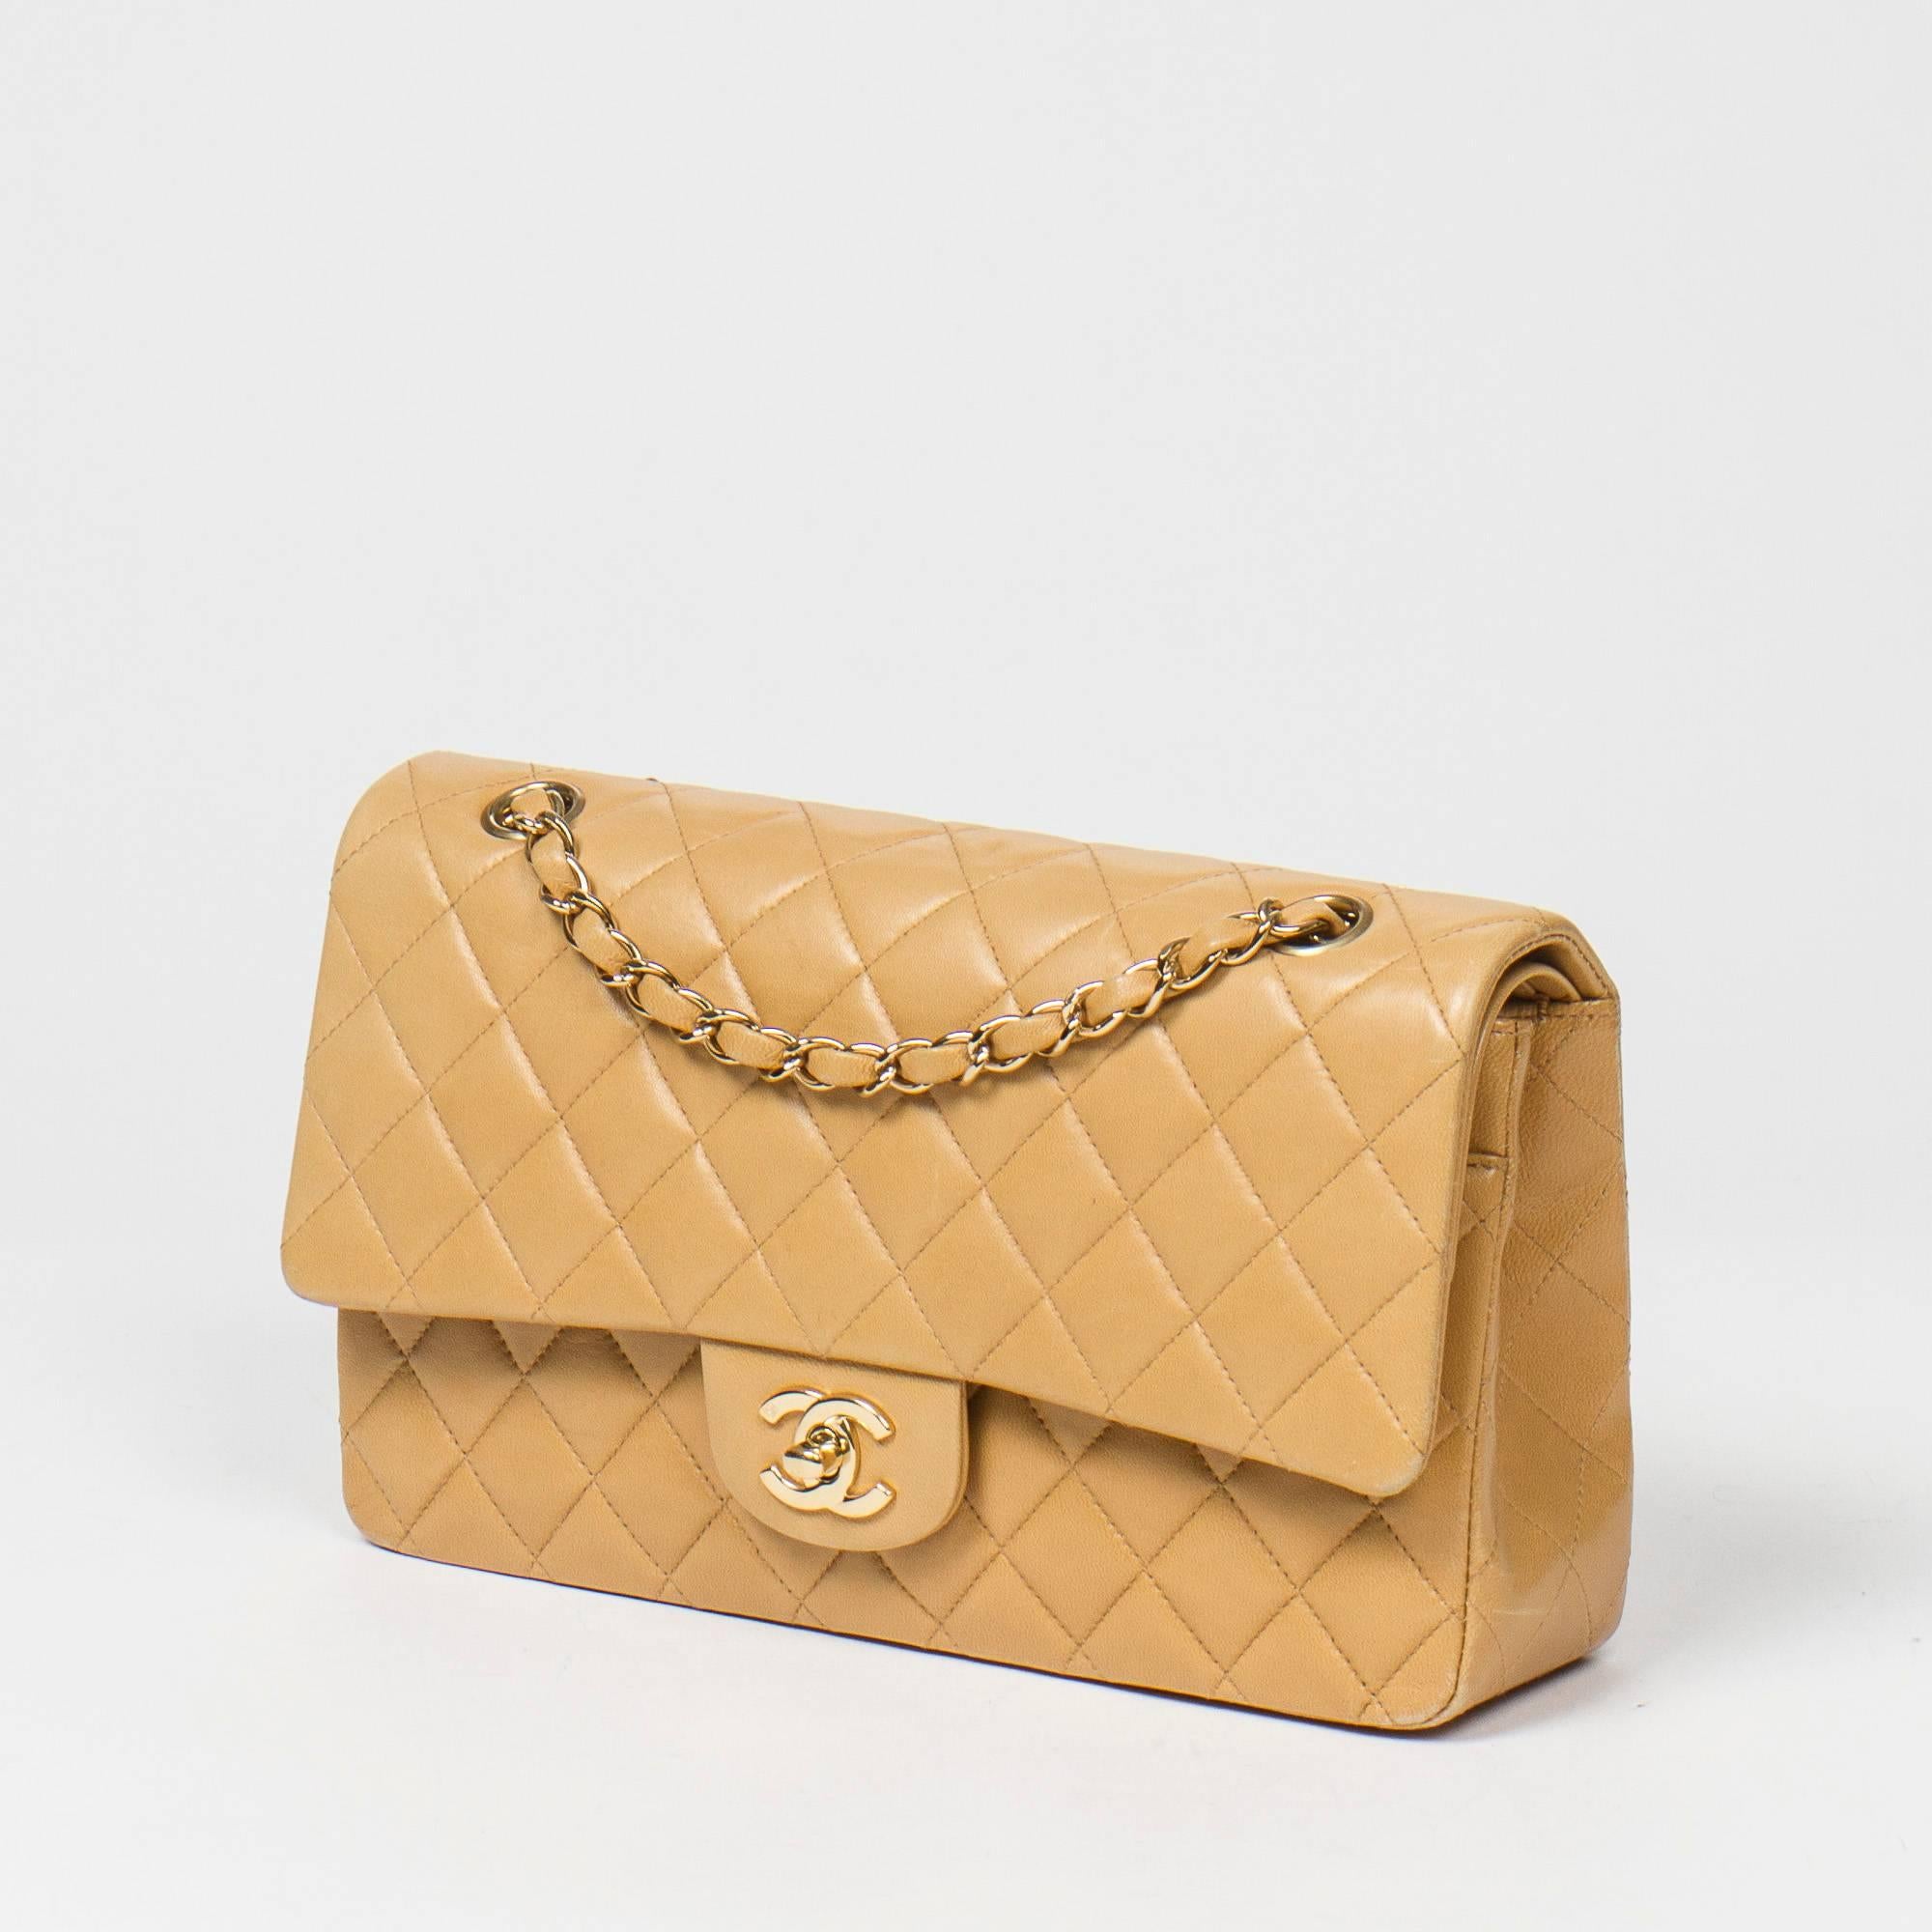 Classic Double Flap 26 in beige quilted calf leather, double chain strap interlaced with leather, signature turnlock closure, gold tone hardware. Back slip pocket. Beige leather lined interior with 3 slip pockets. Gold tone heat stamp 